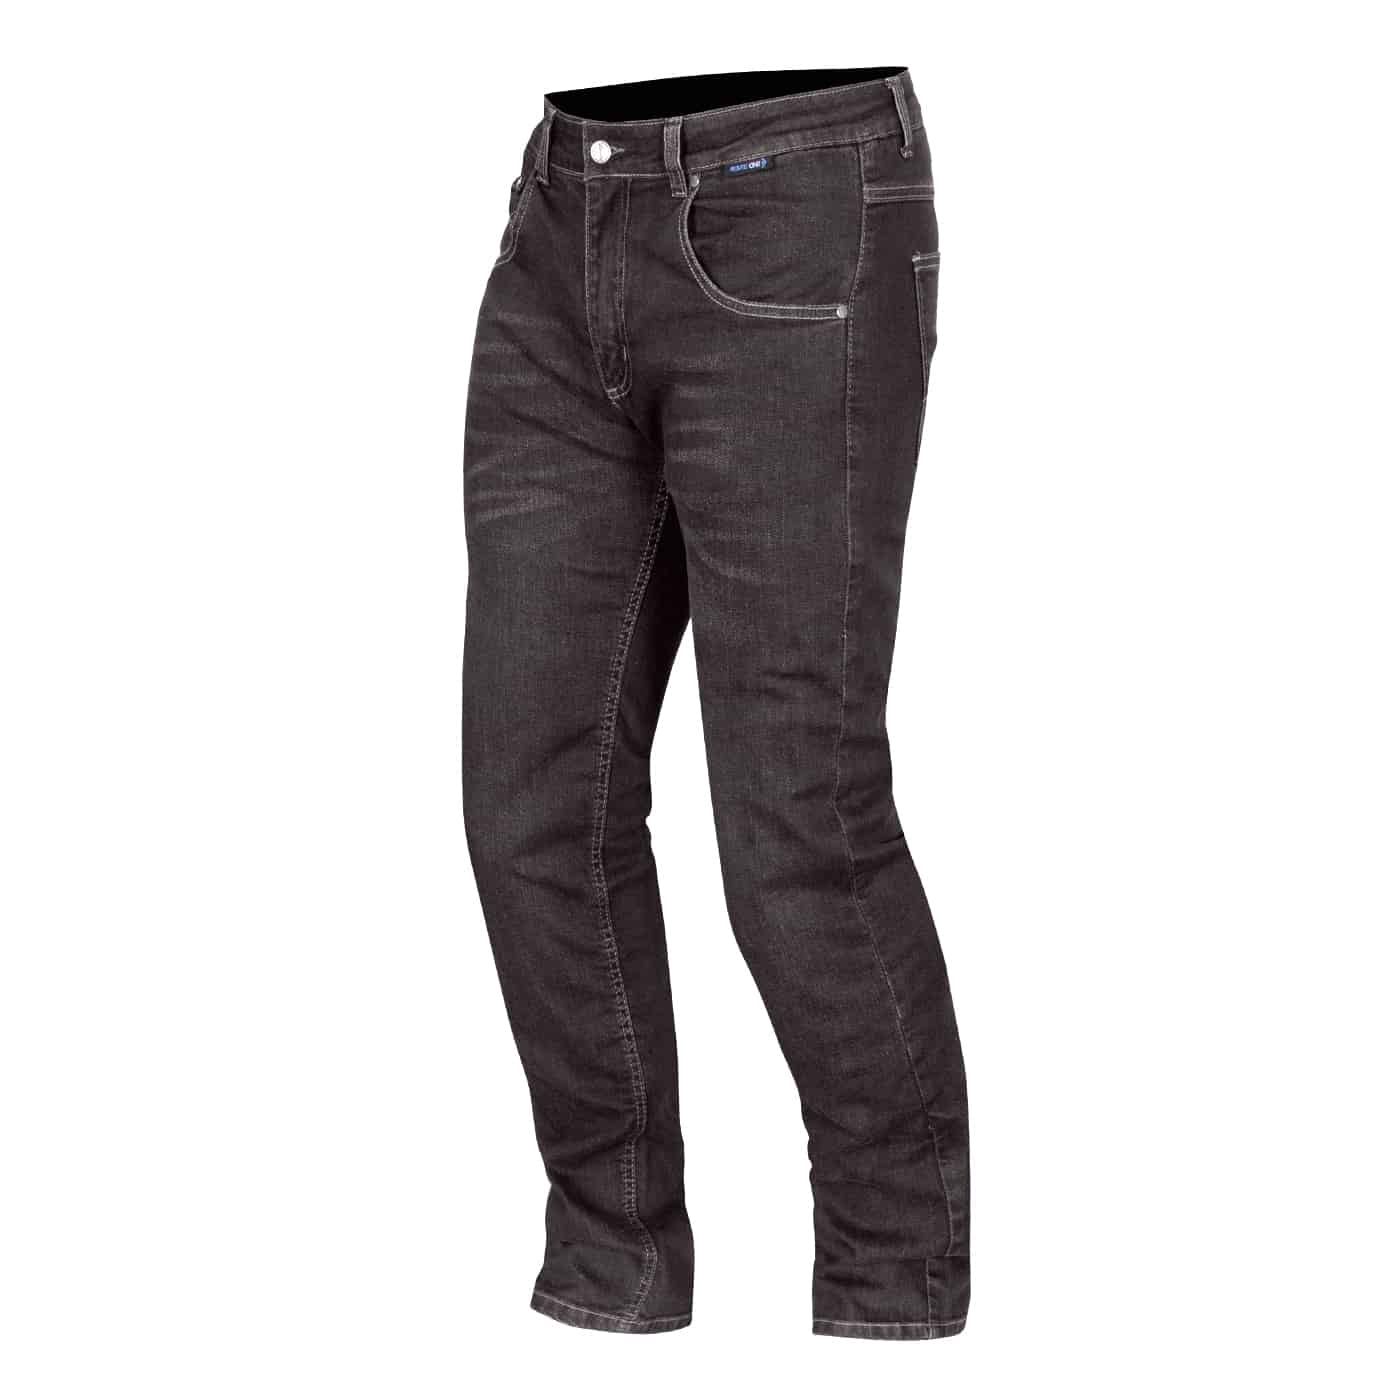 Route One Merlin Duke motorcycle riding jeans in black